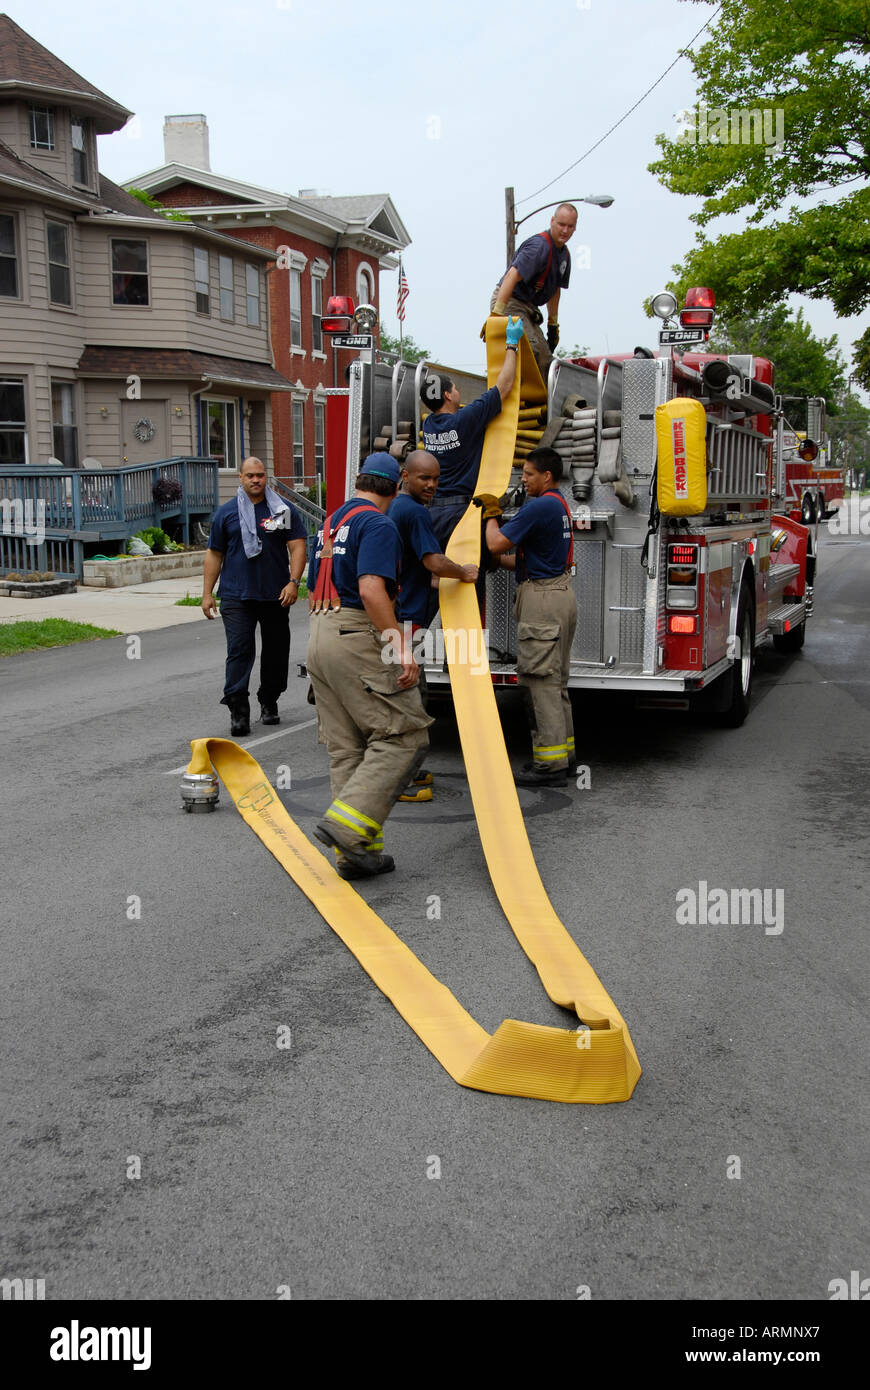 Fireman with fire fighting equipment respond to emergency fire situations Stock Photo